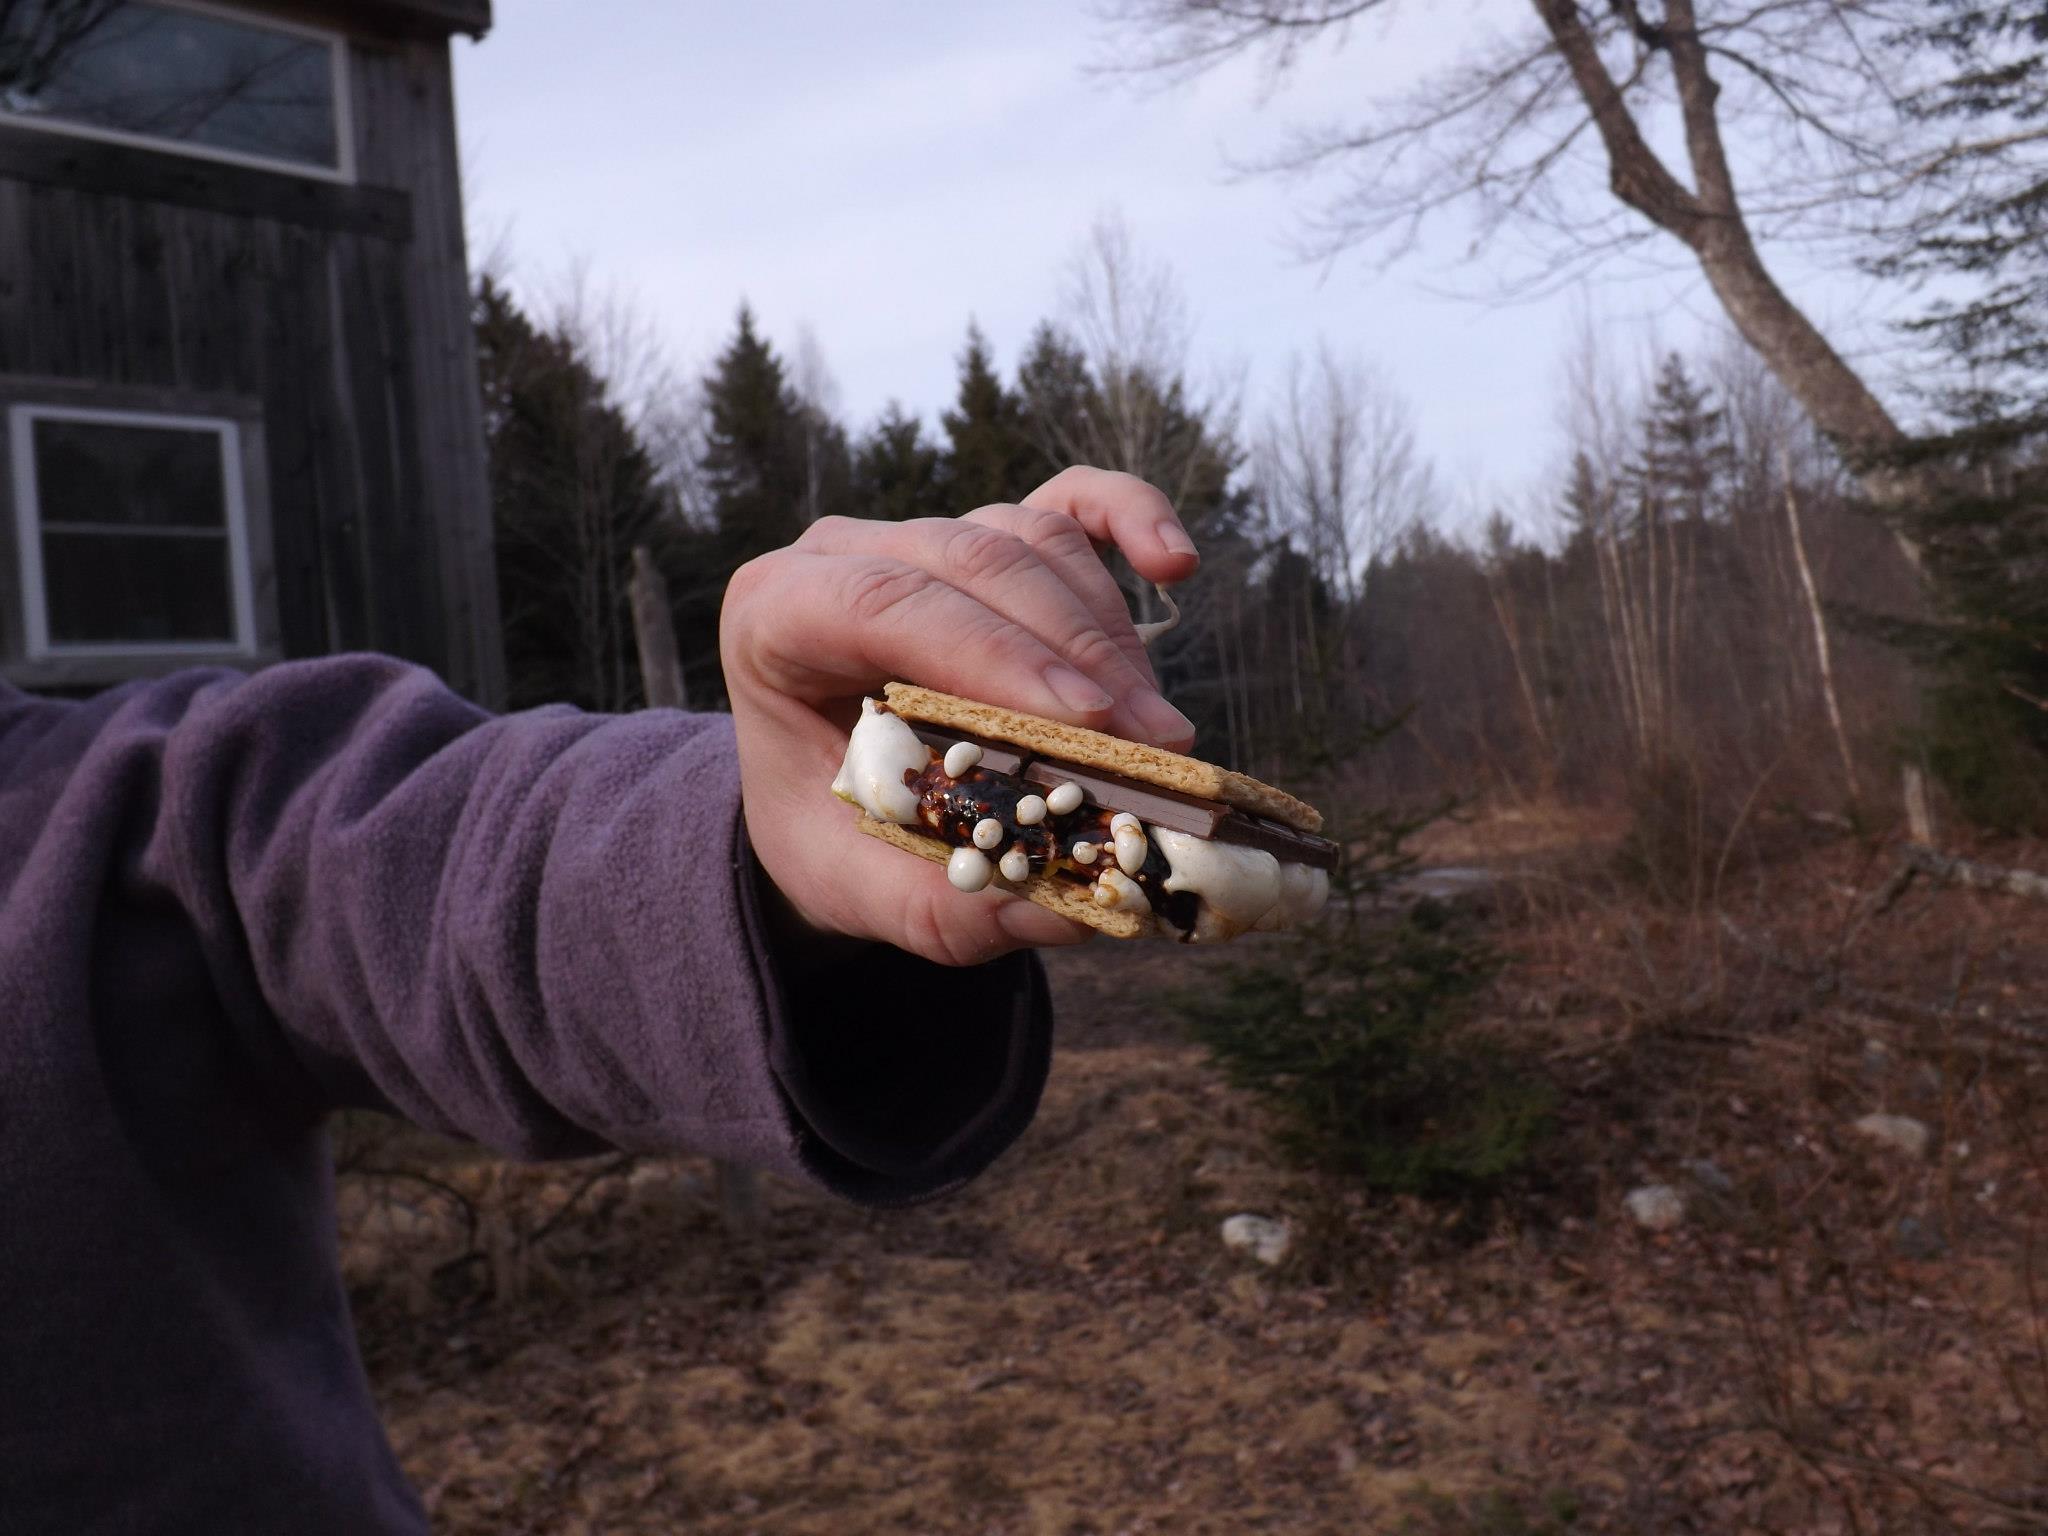 A hand holding a s'more.